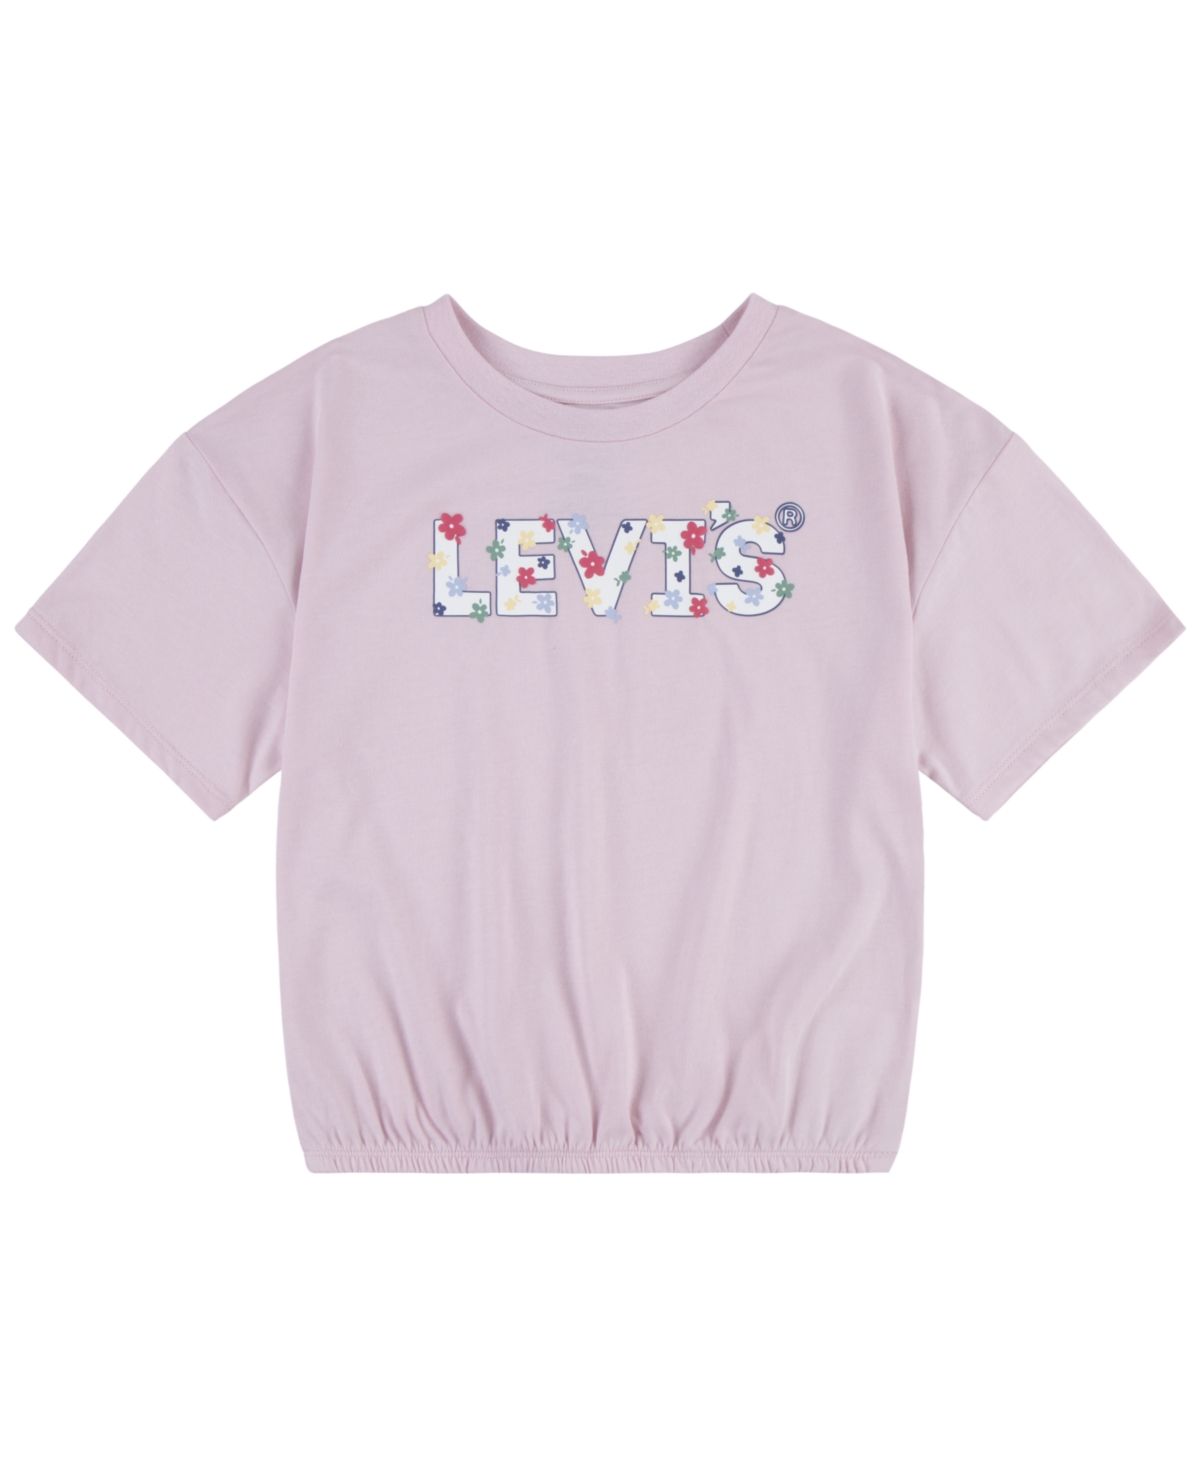 Levi's Kids' Big Girls Floral Elastic Bubble Short Sleeve Top In Chalk Pink